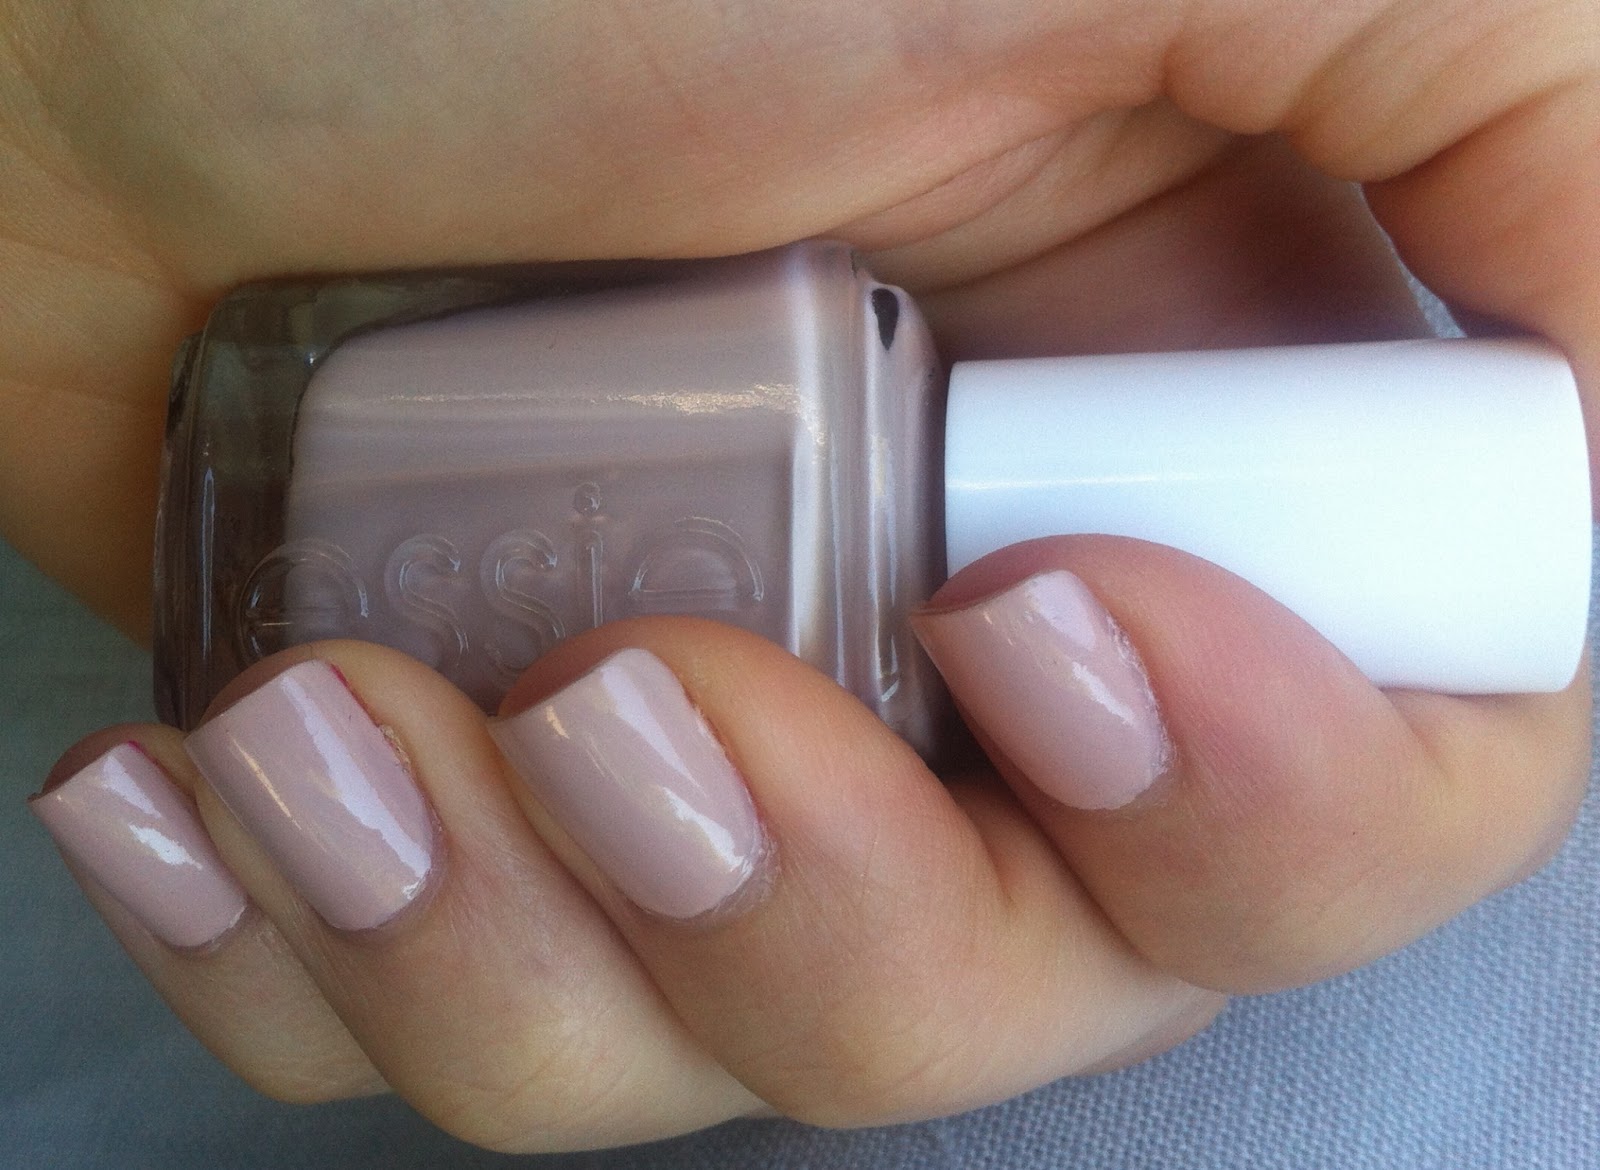 2. Essie Nail Polish in "Topless & Barefoot" - wide 4